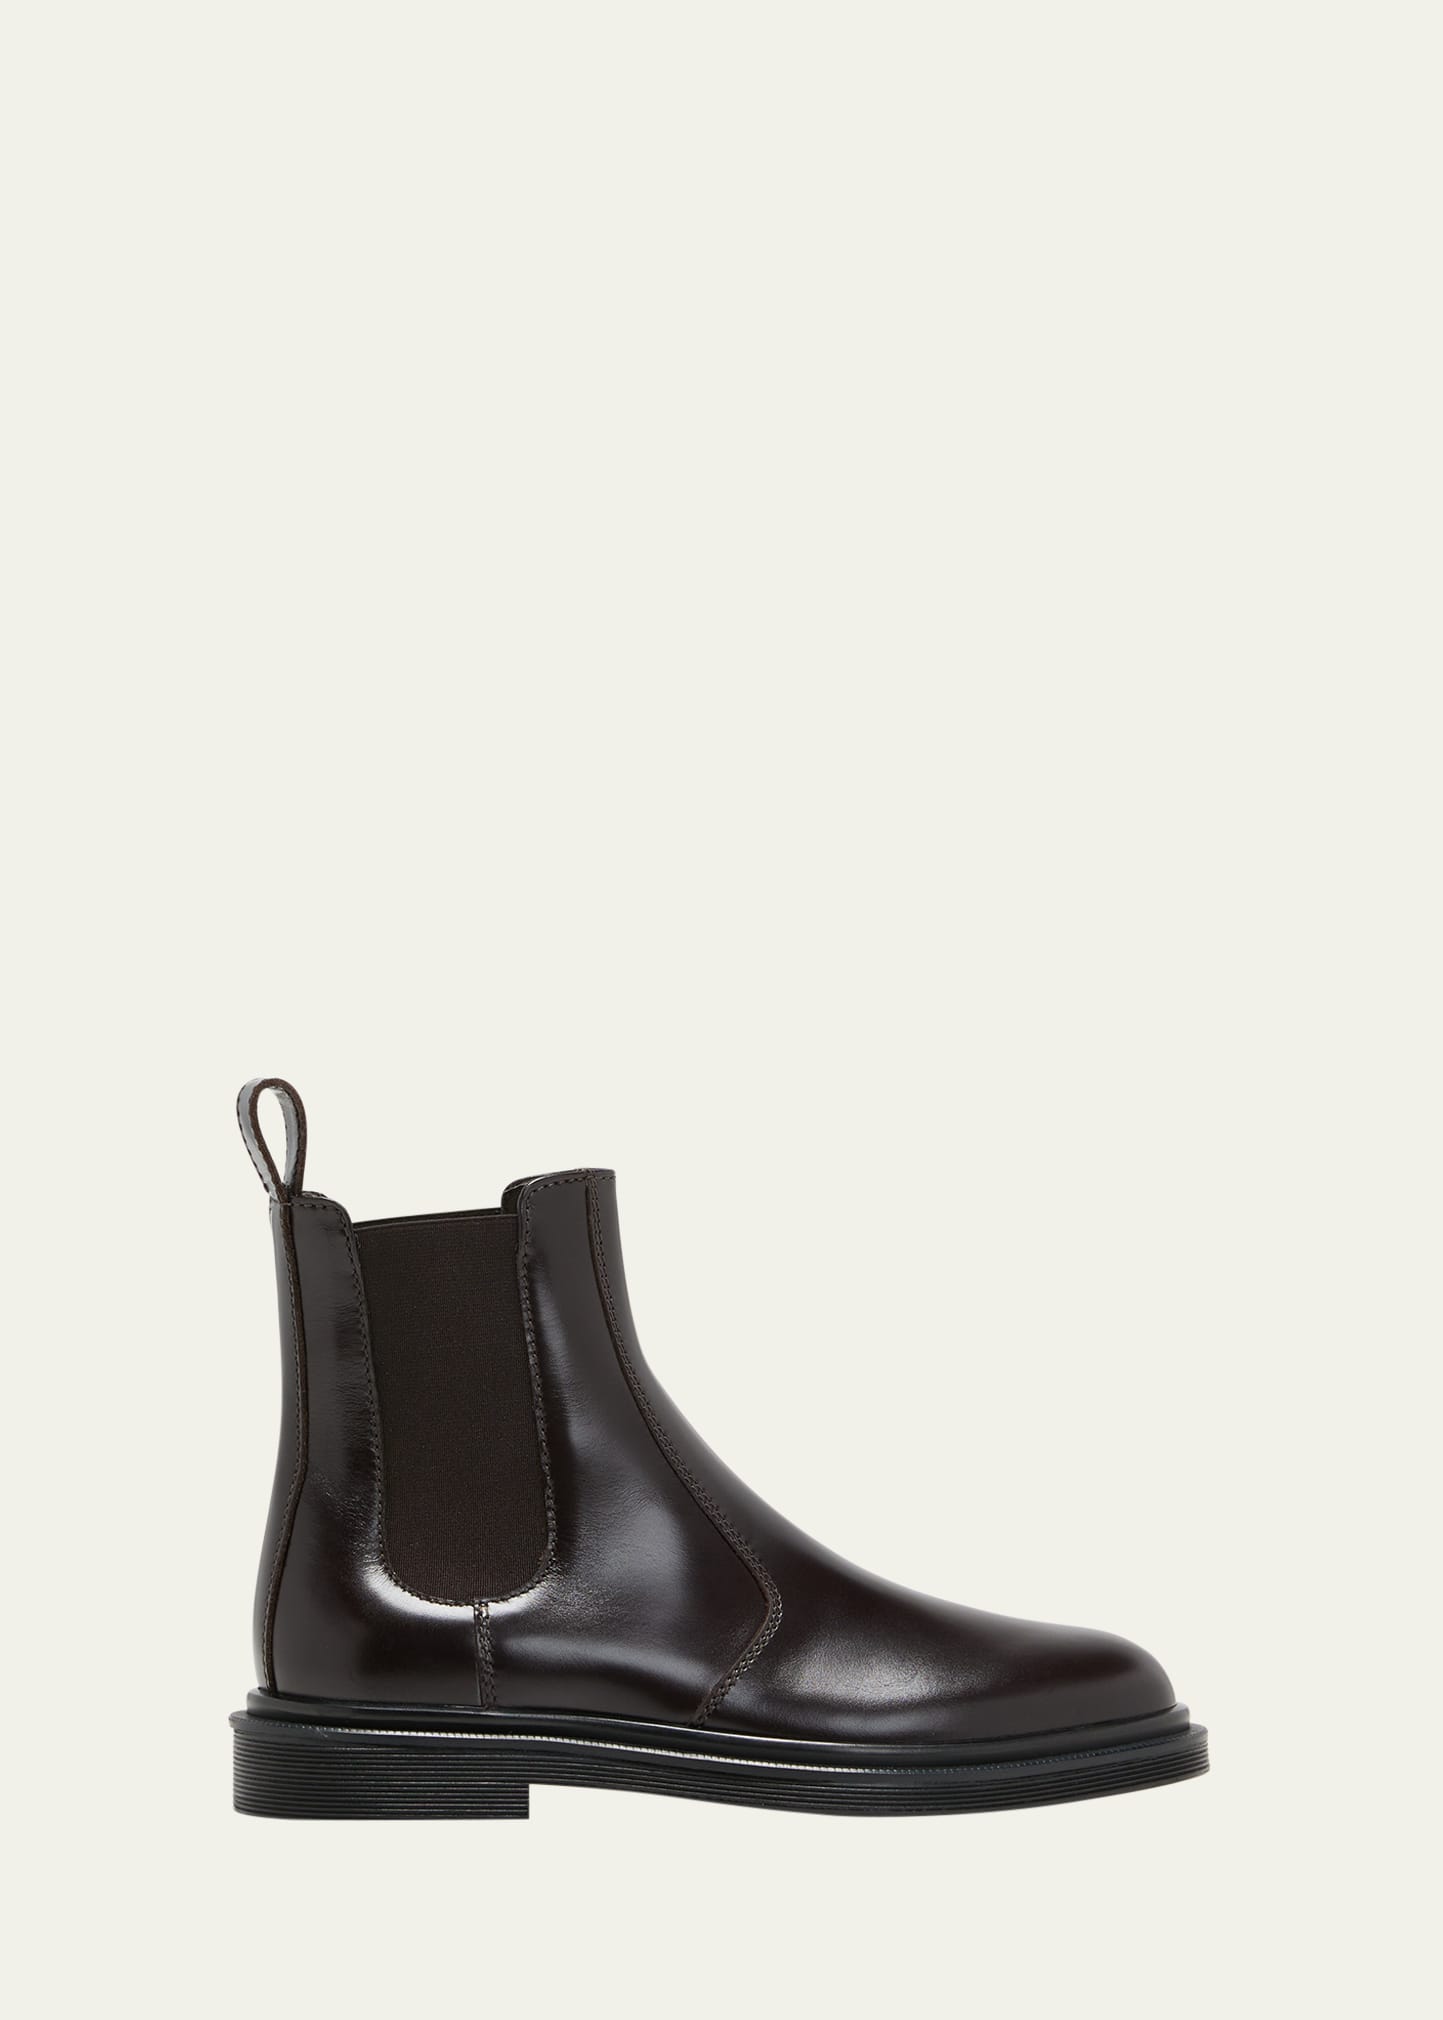 Ranger Patent Leather Chelsea Boots